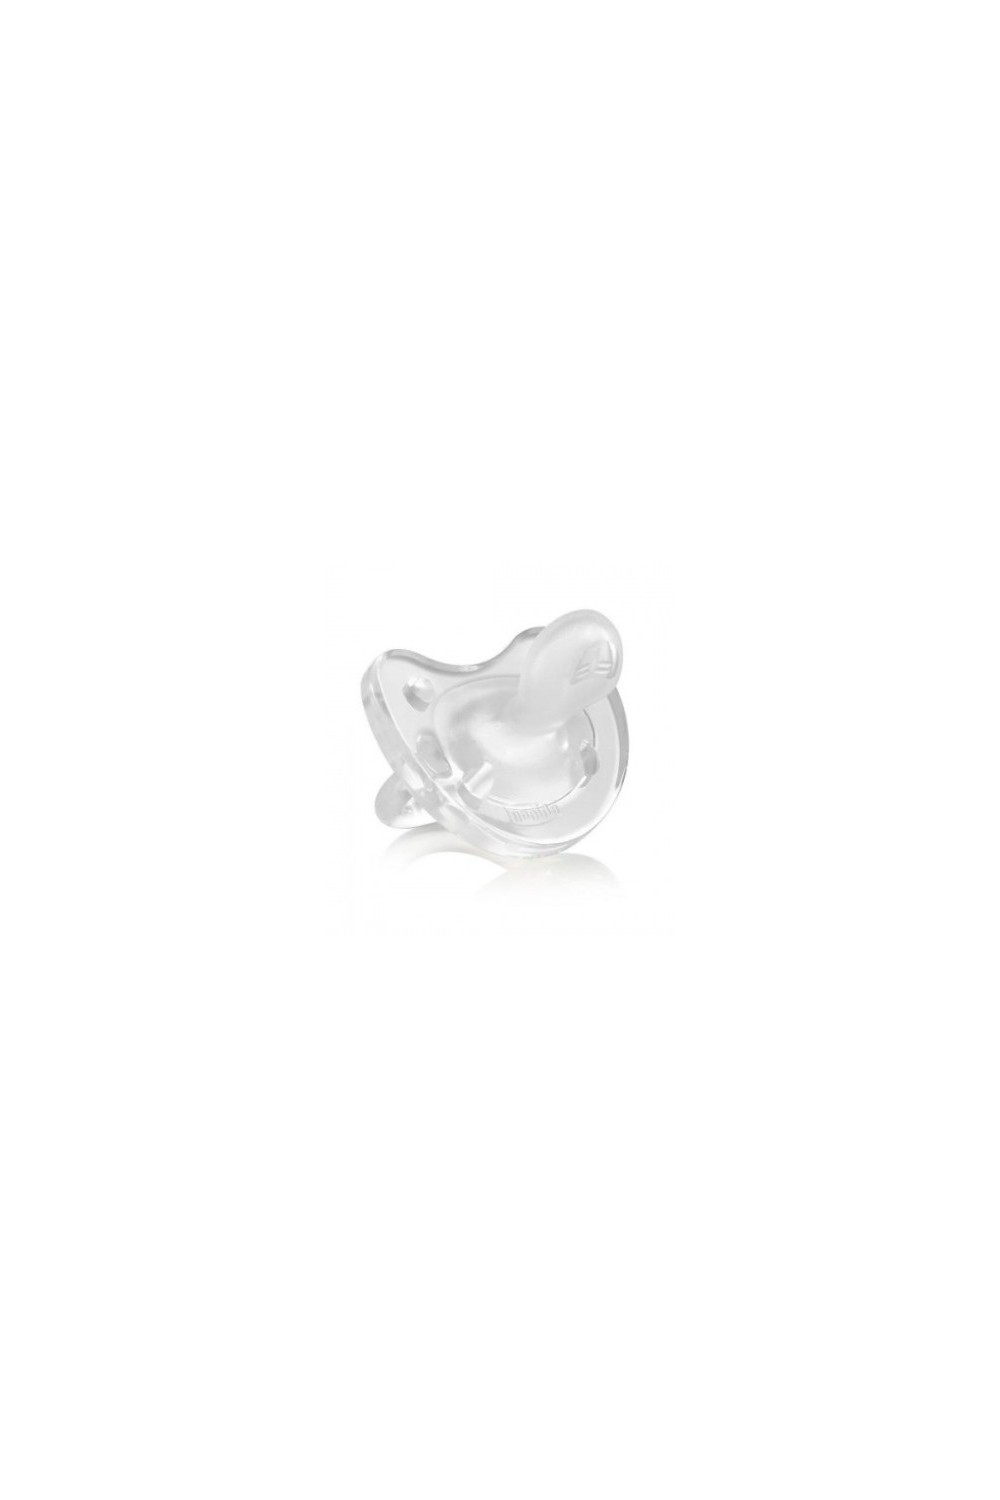 Chicco Silicone Physio Soft Pacifier 4M+ 1U